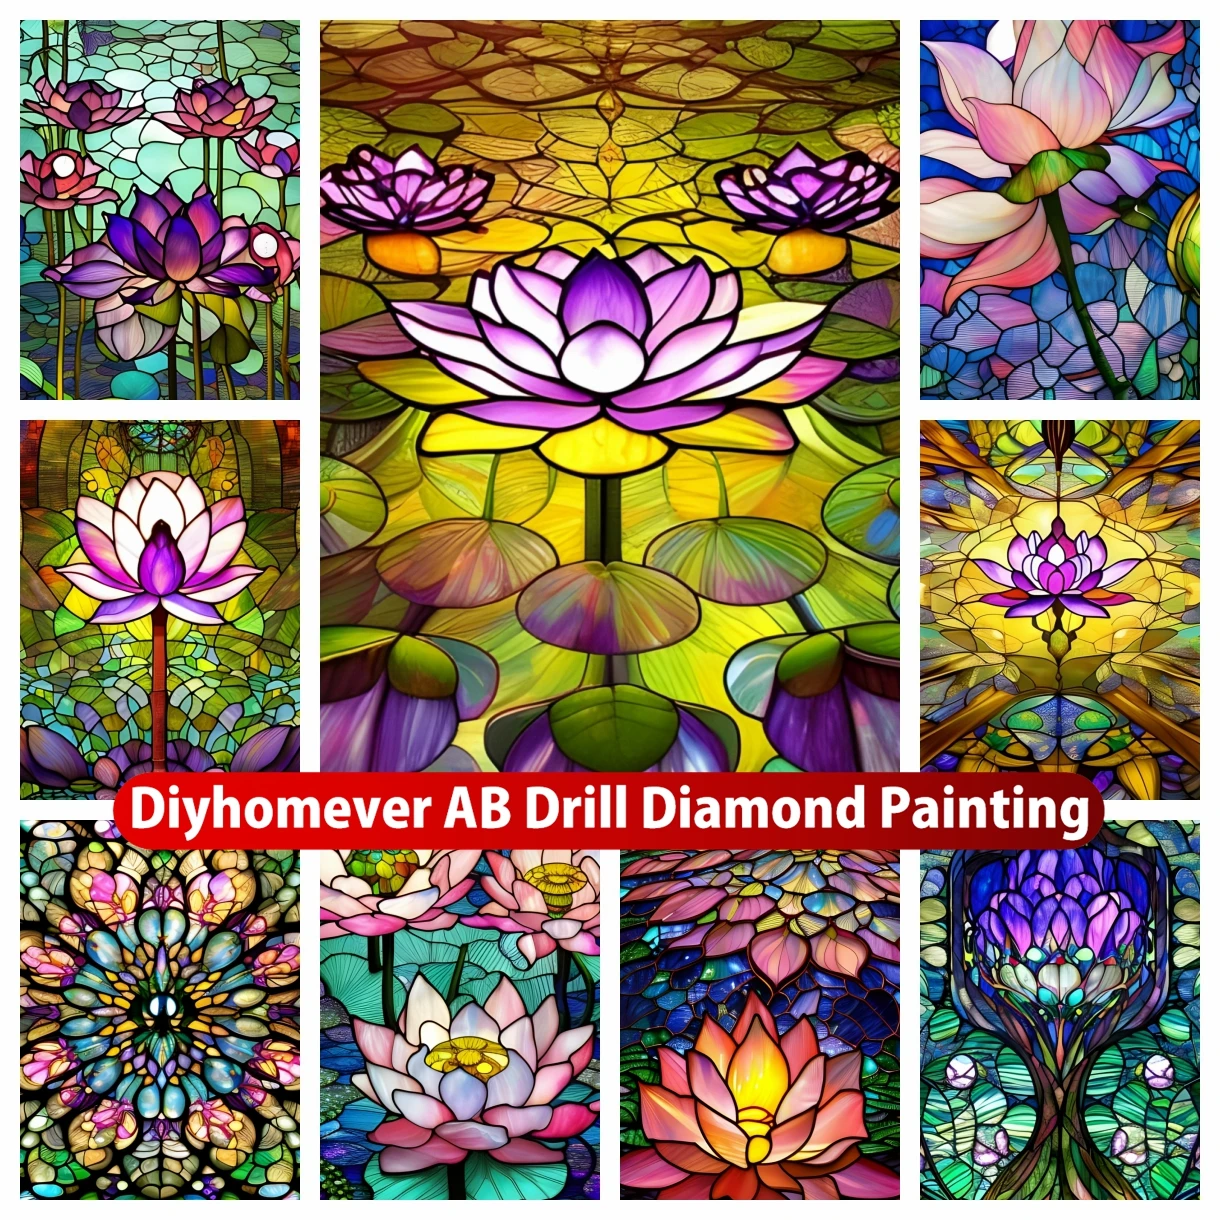 Stained Glass Lotus Flower Diamond Art Painting Fantasy Pond And Tree  Landscape Mosaic Cross Stitch Crystal Craft Home Decor - AliExpress